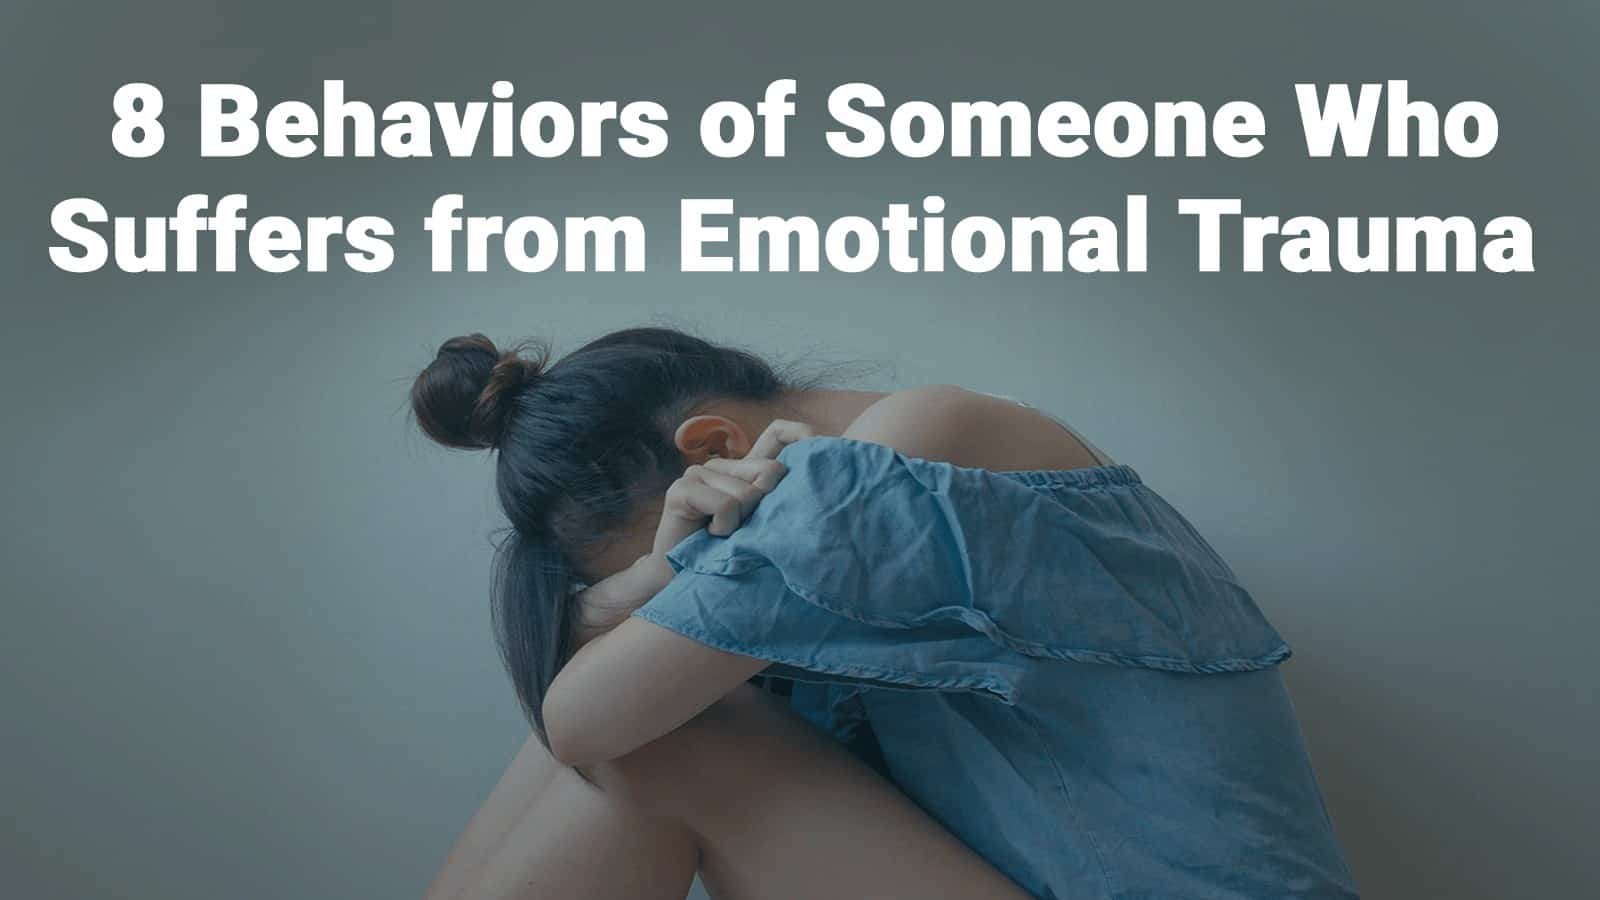 8 Behaviors of Someone Who Suffers from Emotional Trauma